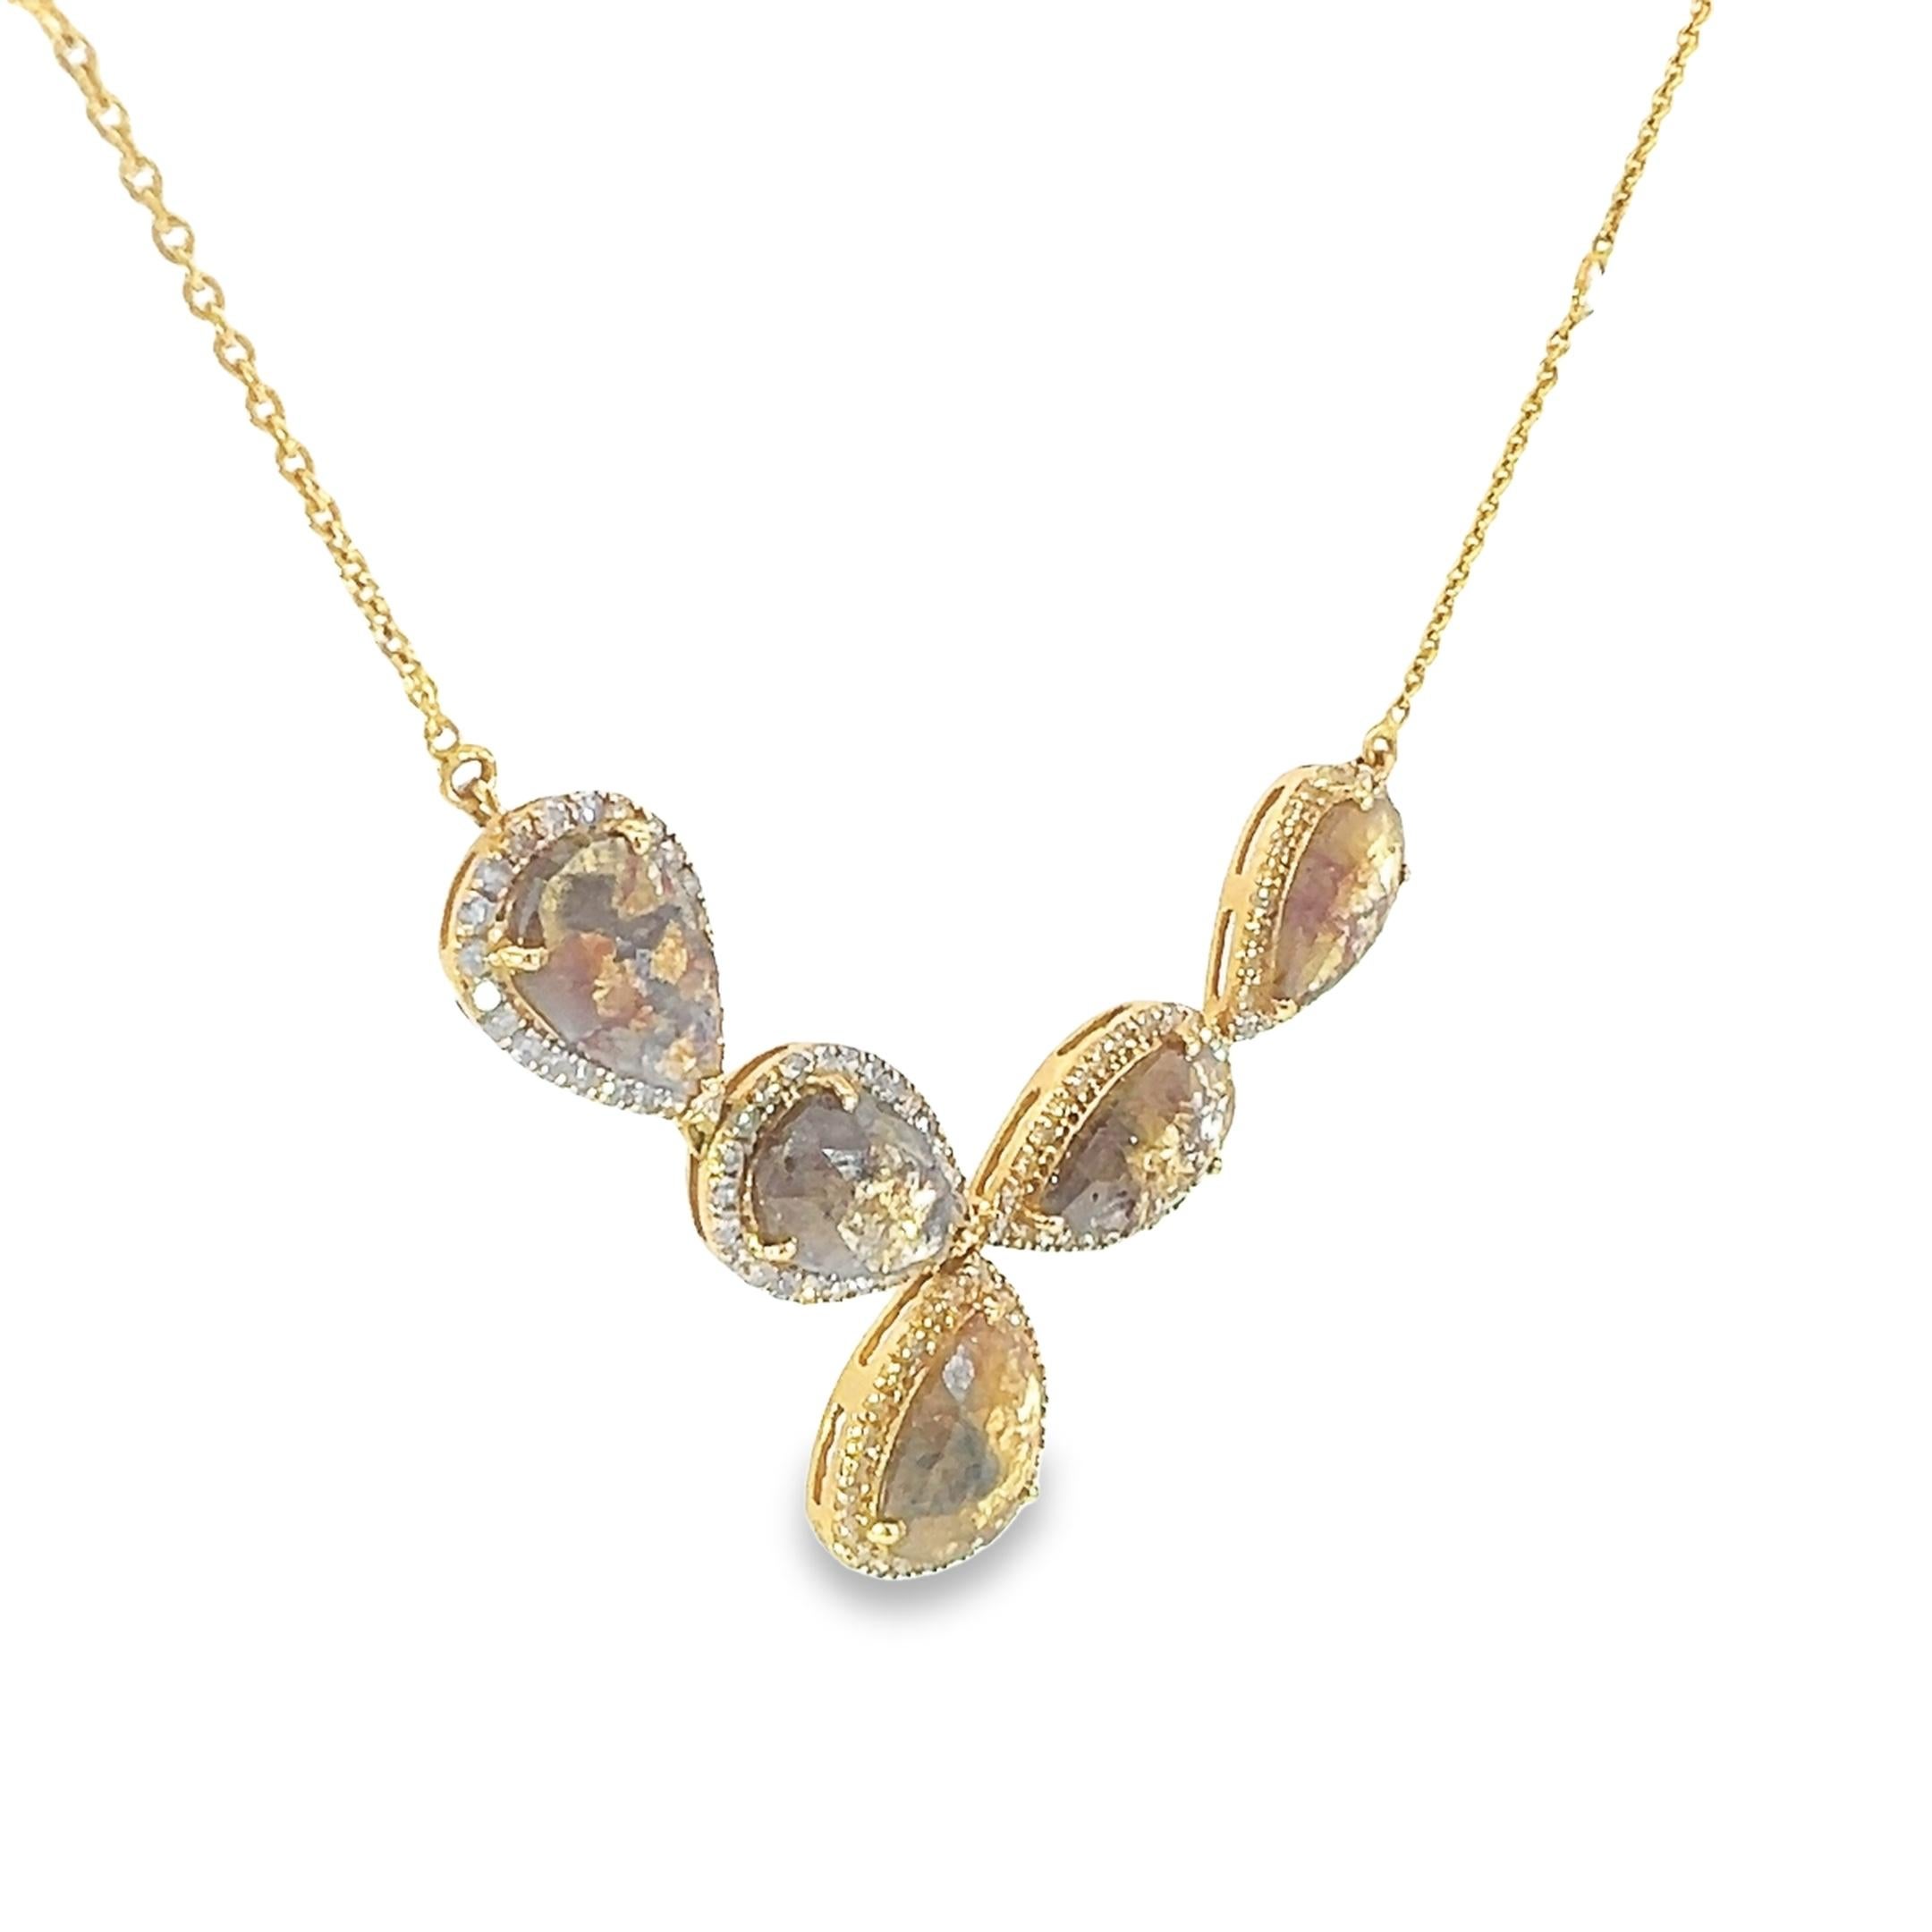 A beautiful necklace made from 7.52-carat diamonds set in 18-kt yellow gold. All the pear shaped diamonds are surrounded by diamonds it gives a stunning and bright looks to the necklace. 
